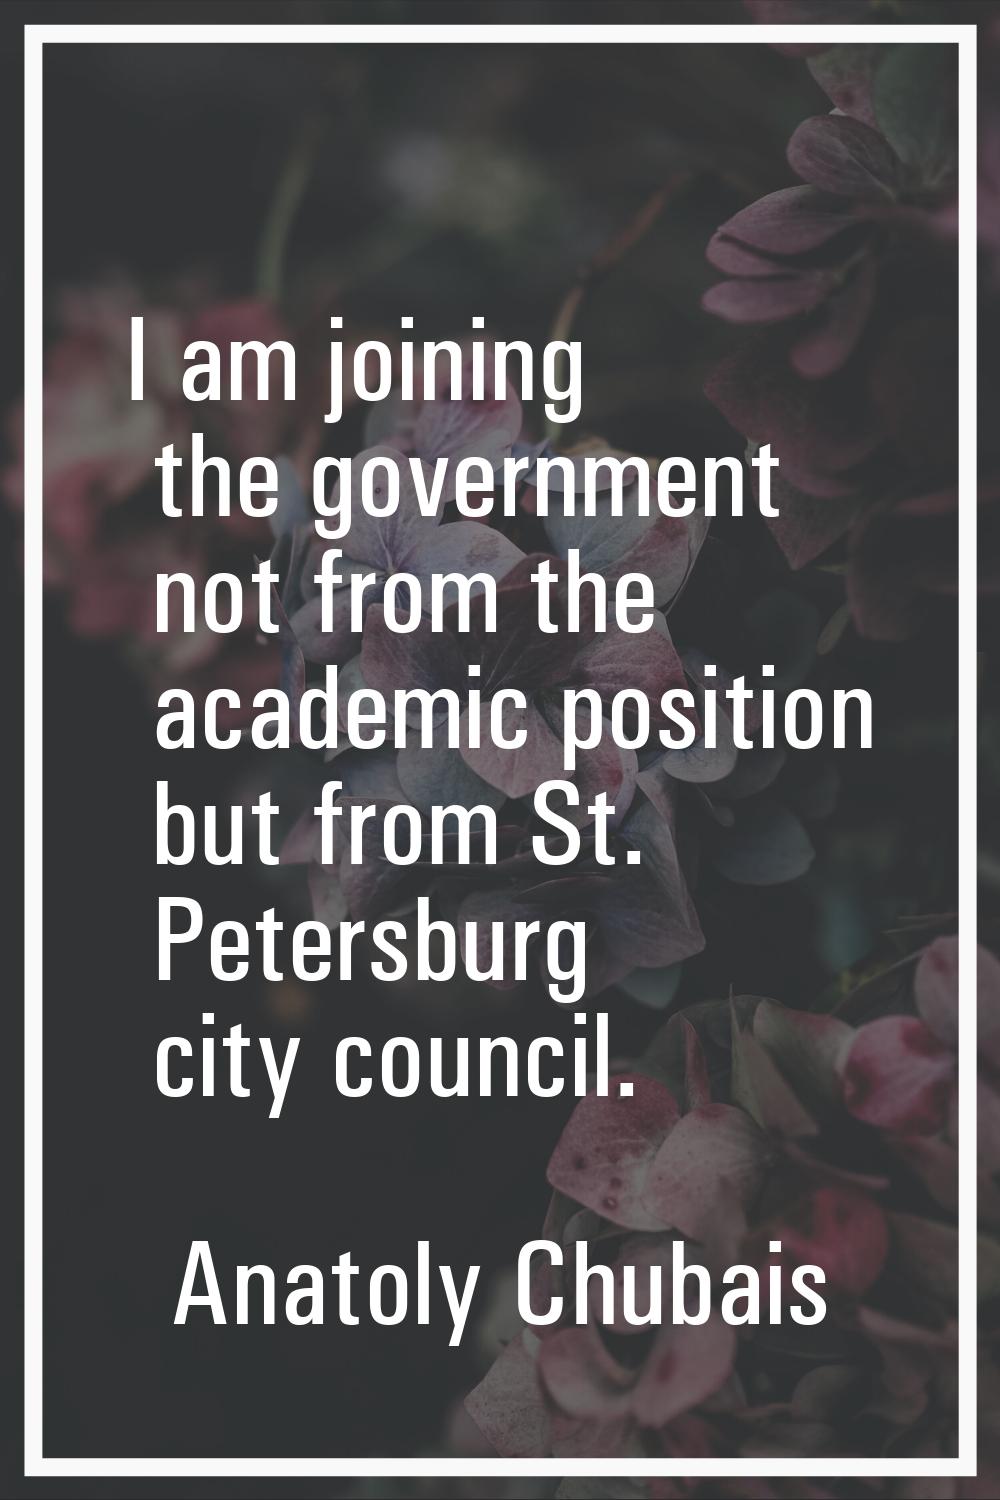 I am joining the government not from the academic position but from St. Petersburg city council.